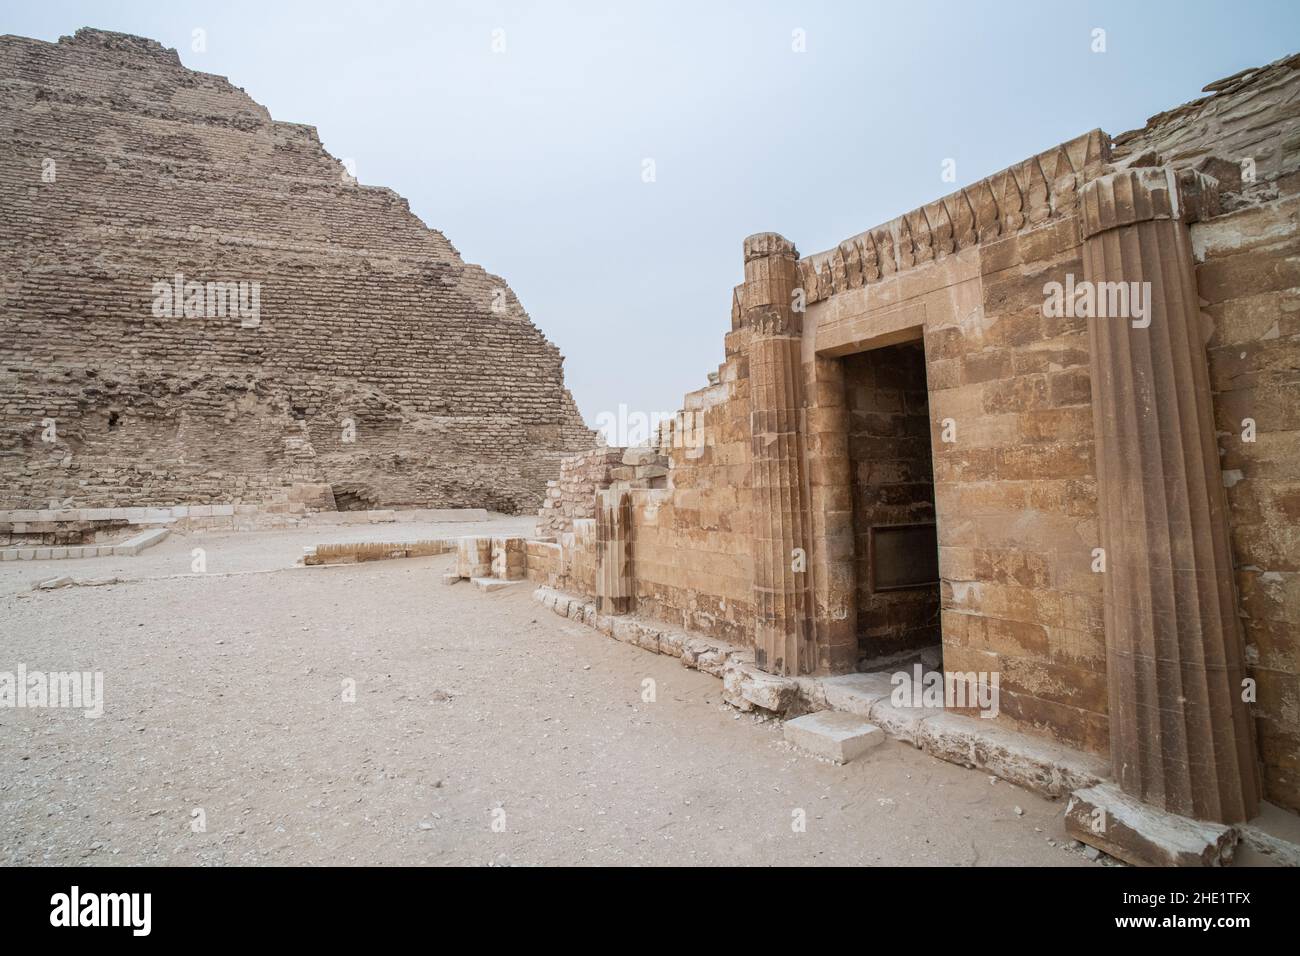 The entrance to one of the temple ruins at the Saqqara necropolis complex in Egypt. Stock Photo